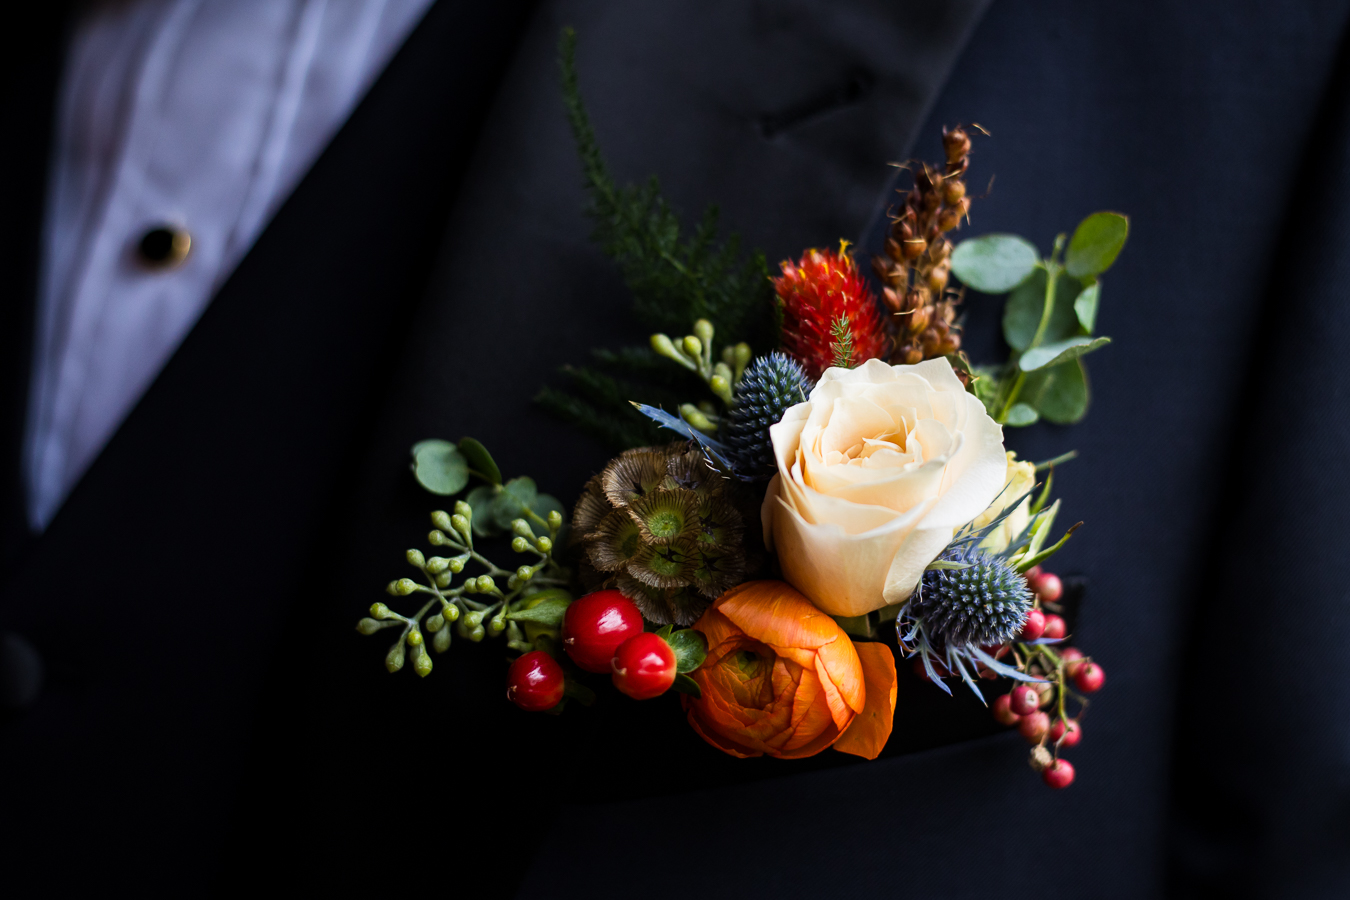 close up detail image of the grooms boutonniere with vibrant fall foliage of red, orange, blue, green and browns 